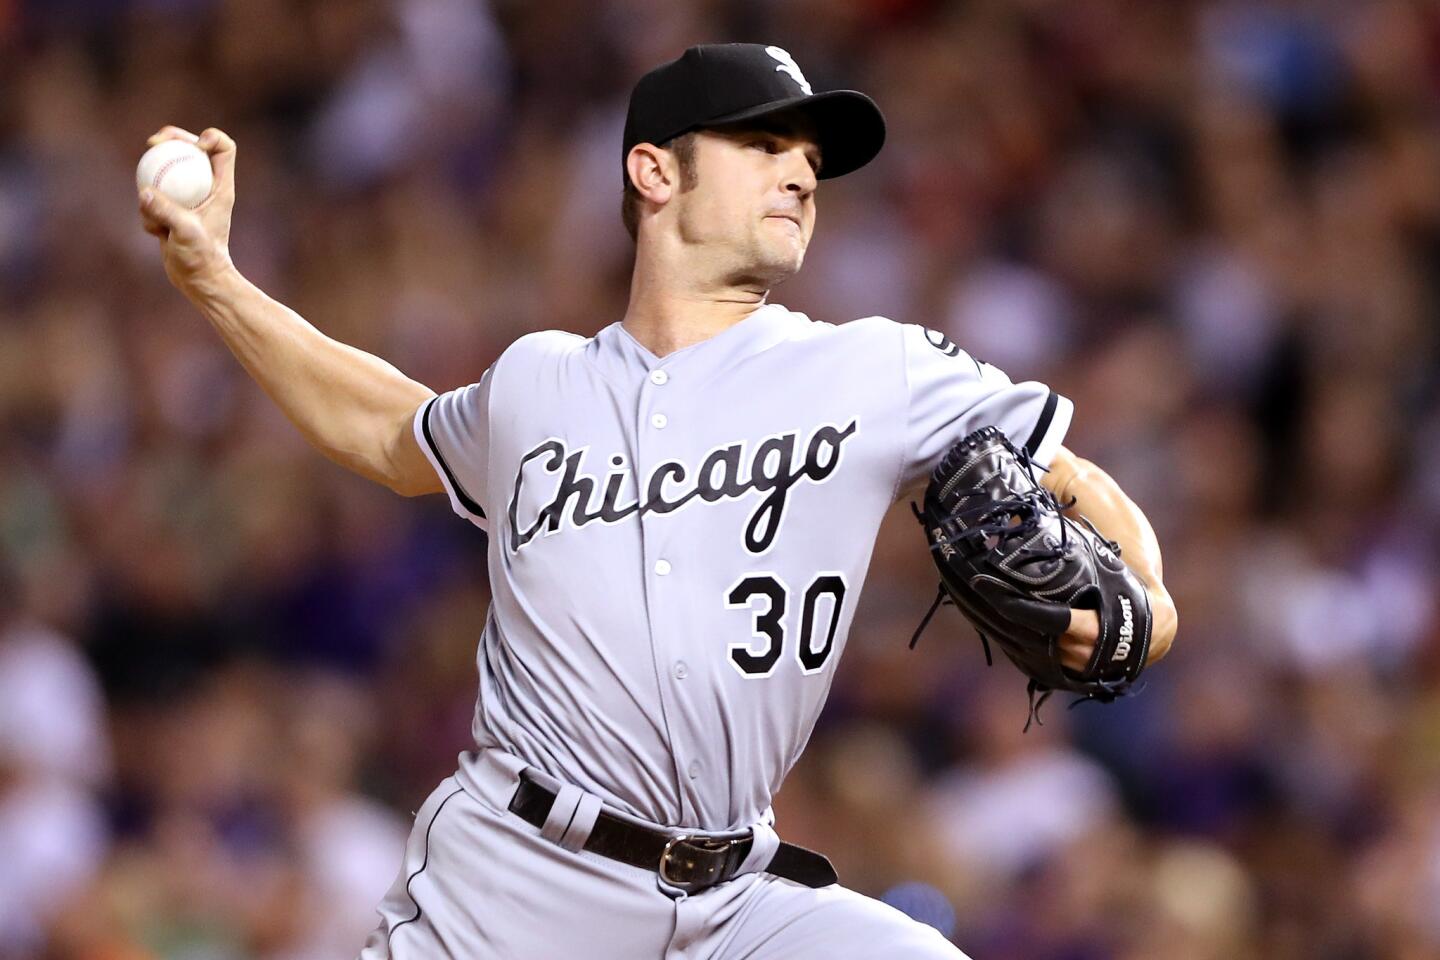 The White Sox already raided their farm system for the Adam Eaton trade. Could they do it again for a long-speculated David Robertson deal? Or what about Tommy Kahnle?